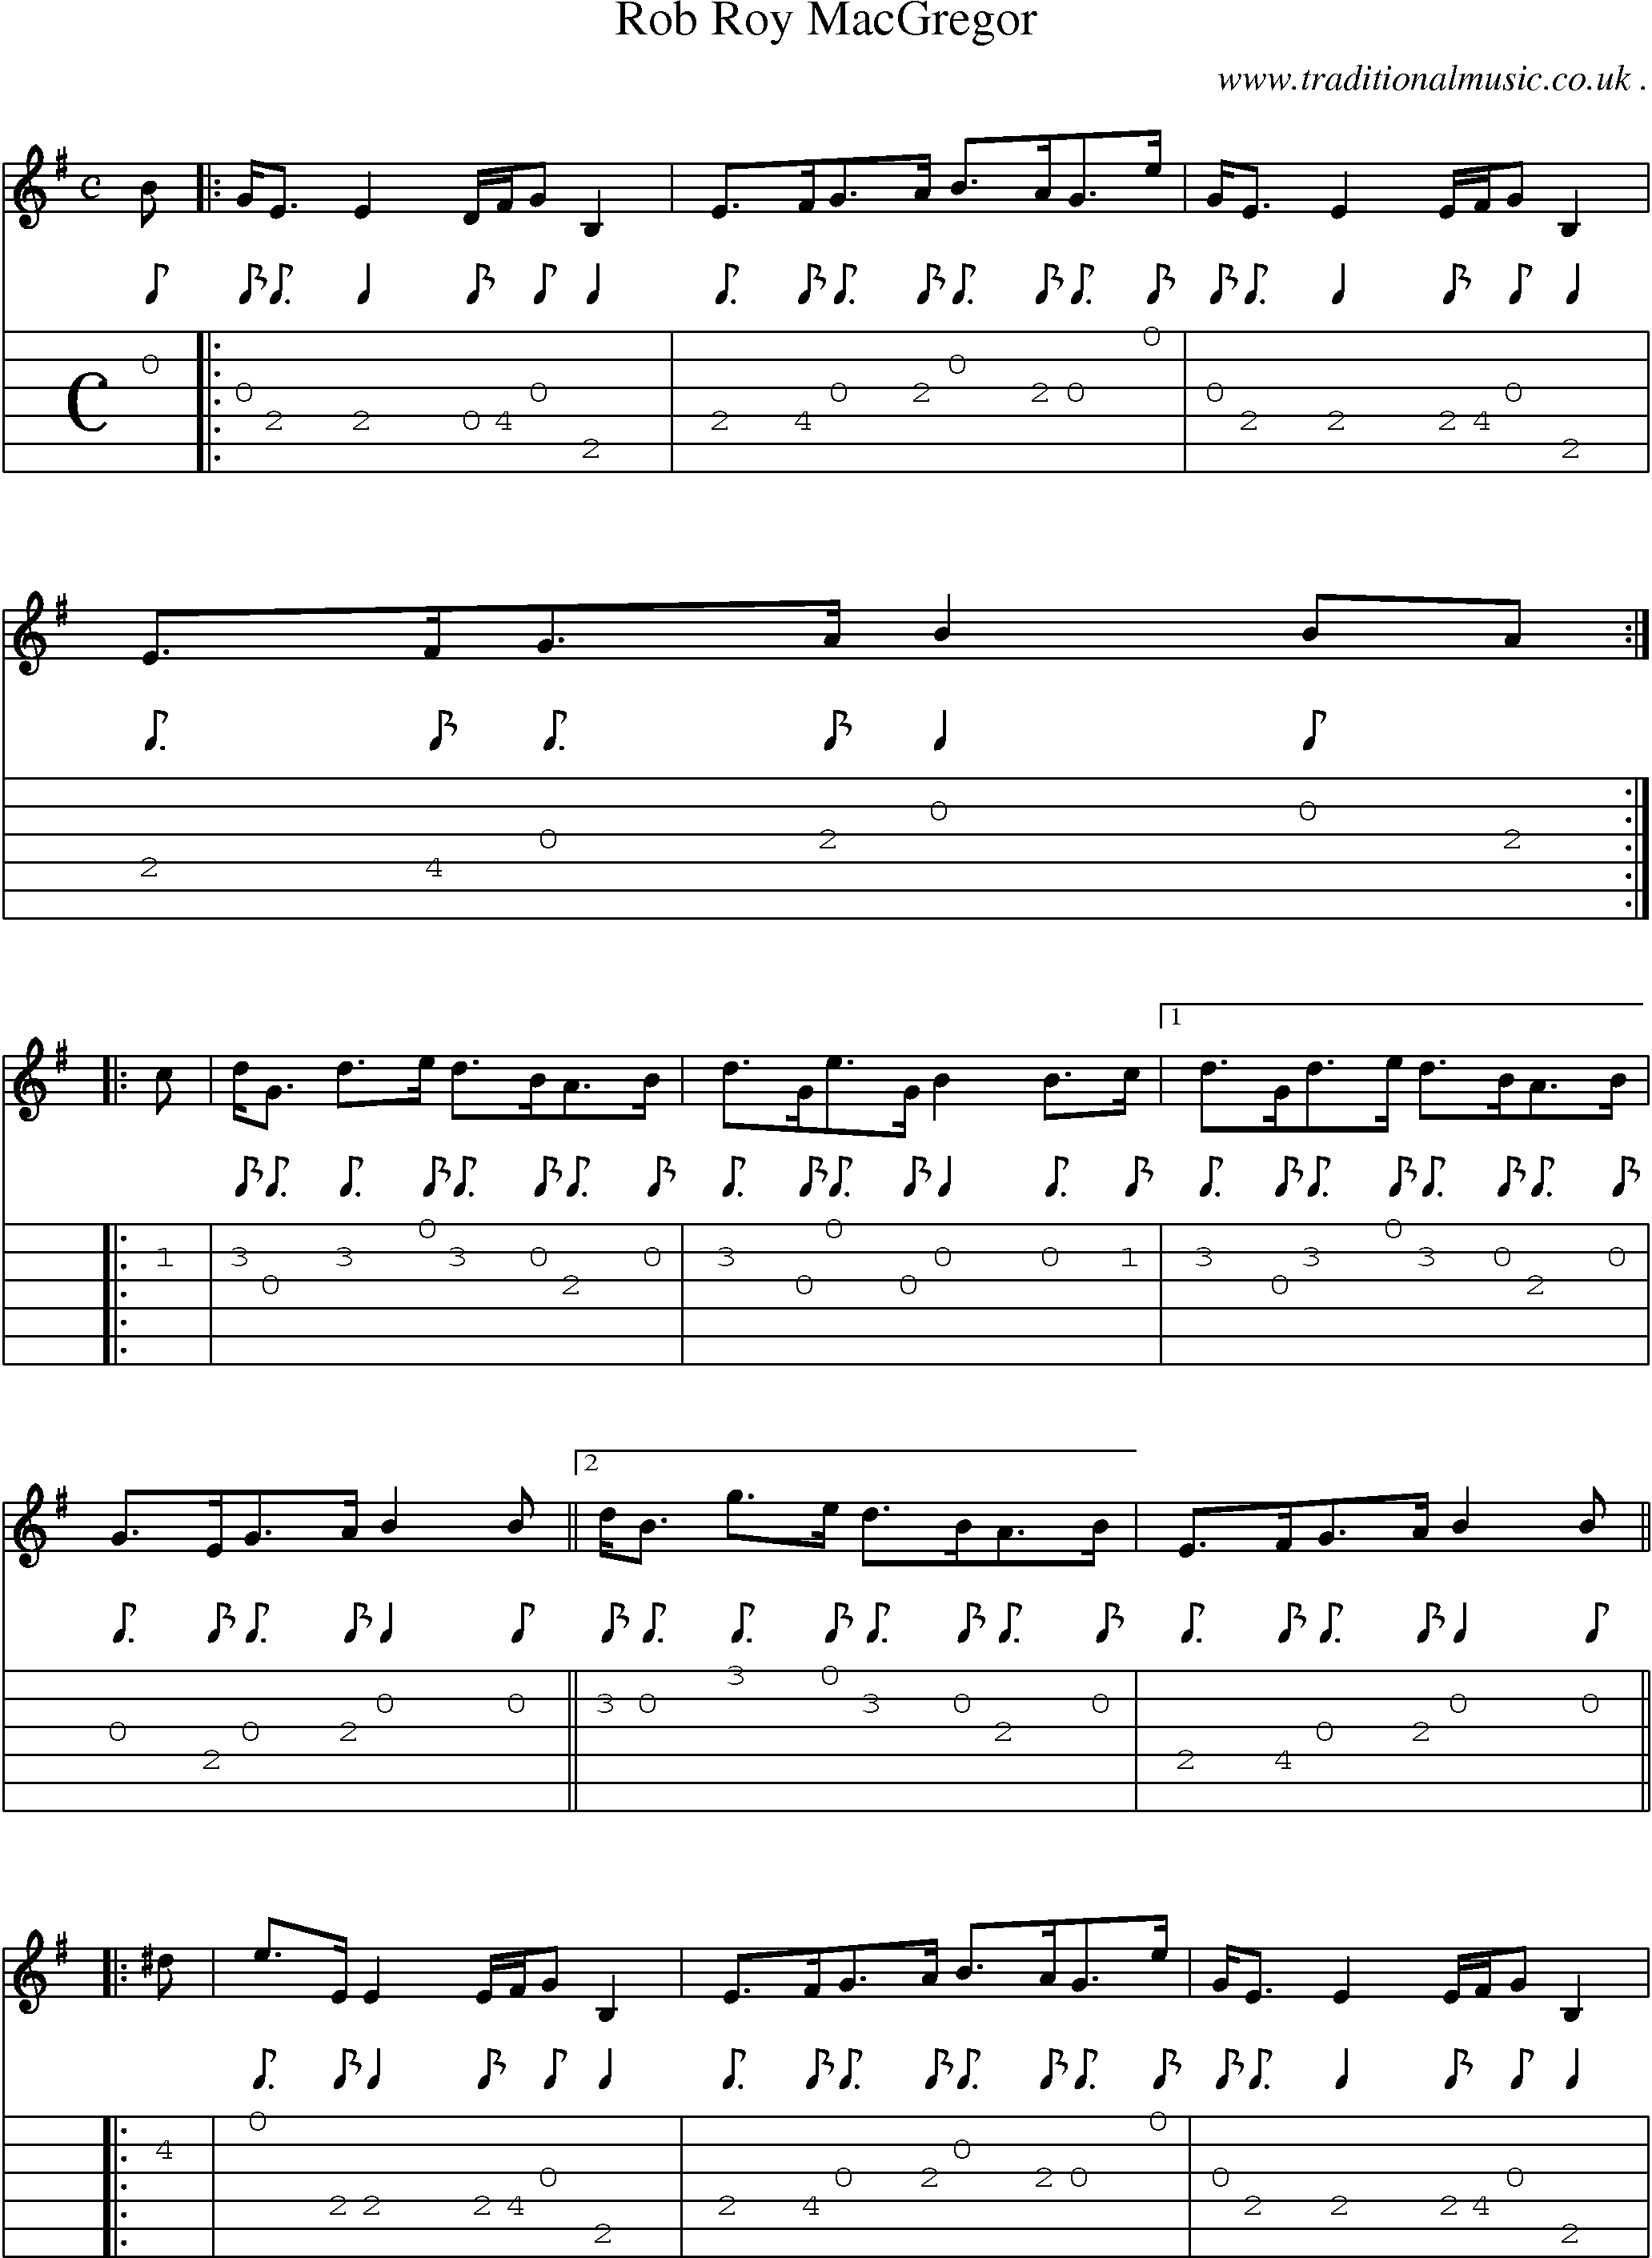 Sheet-music  score, Chords and Guitar Tabs for Rob Roy Macgregor